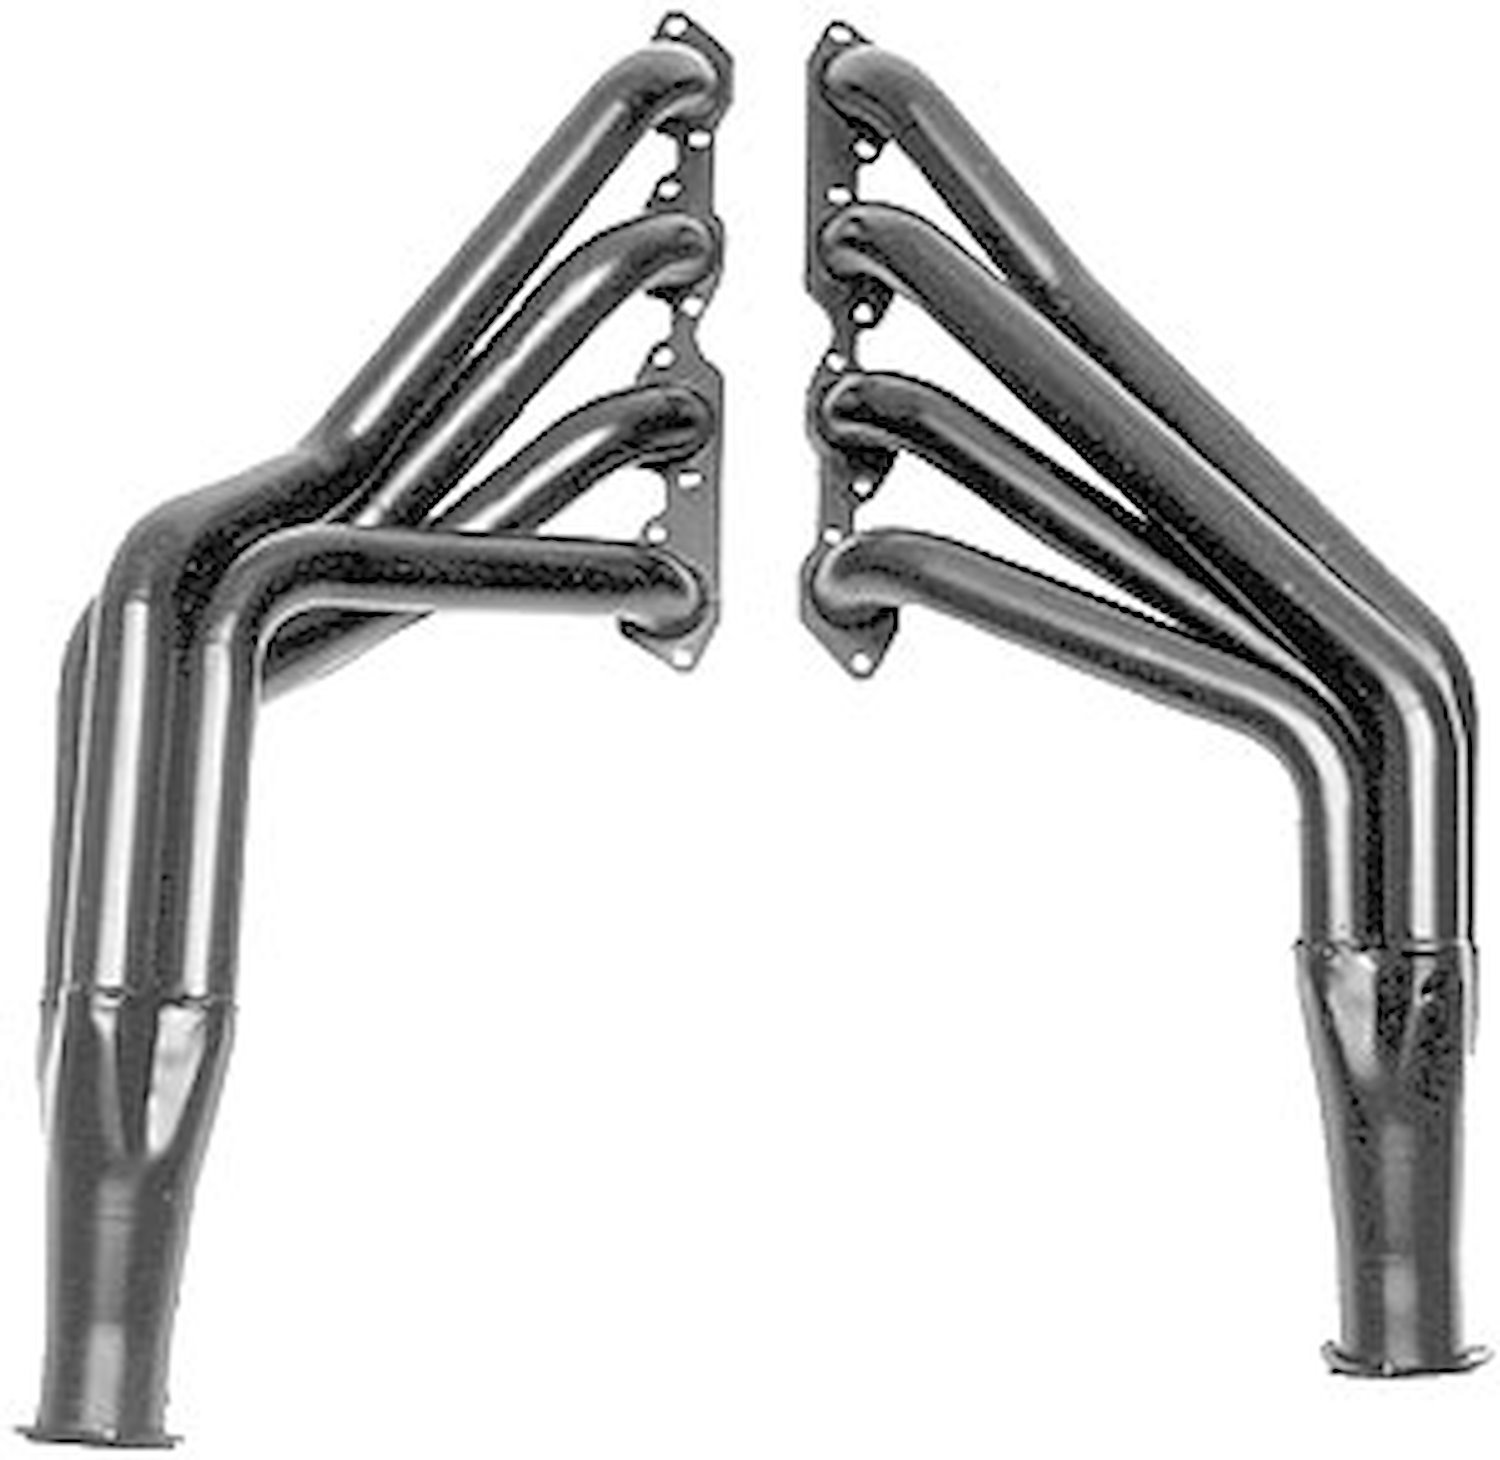 Standard Duty Uncoated Headers for 1967-69 Chevy Camaro 396-502ci